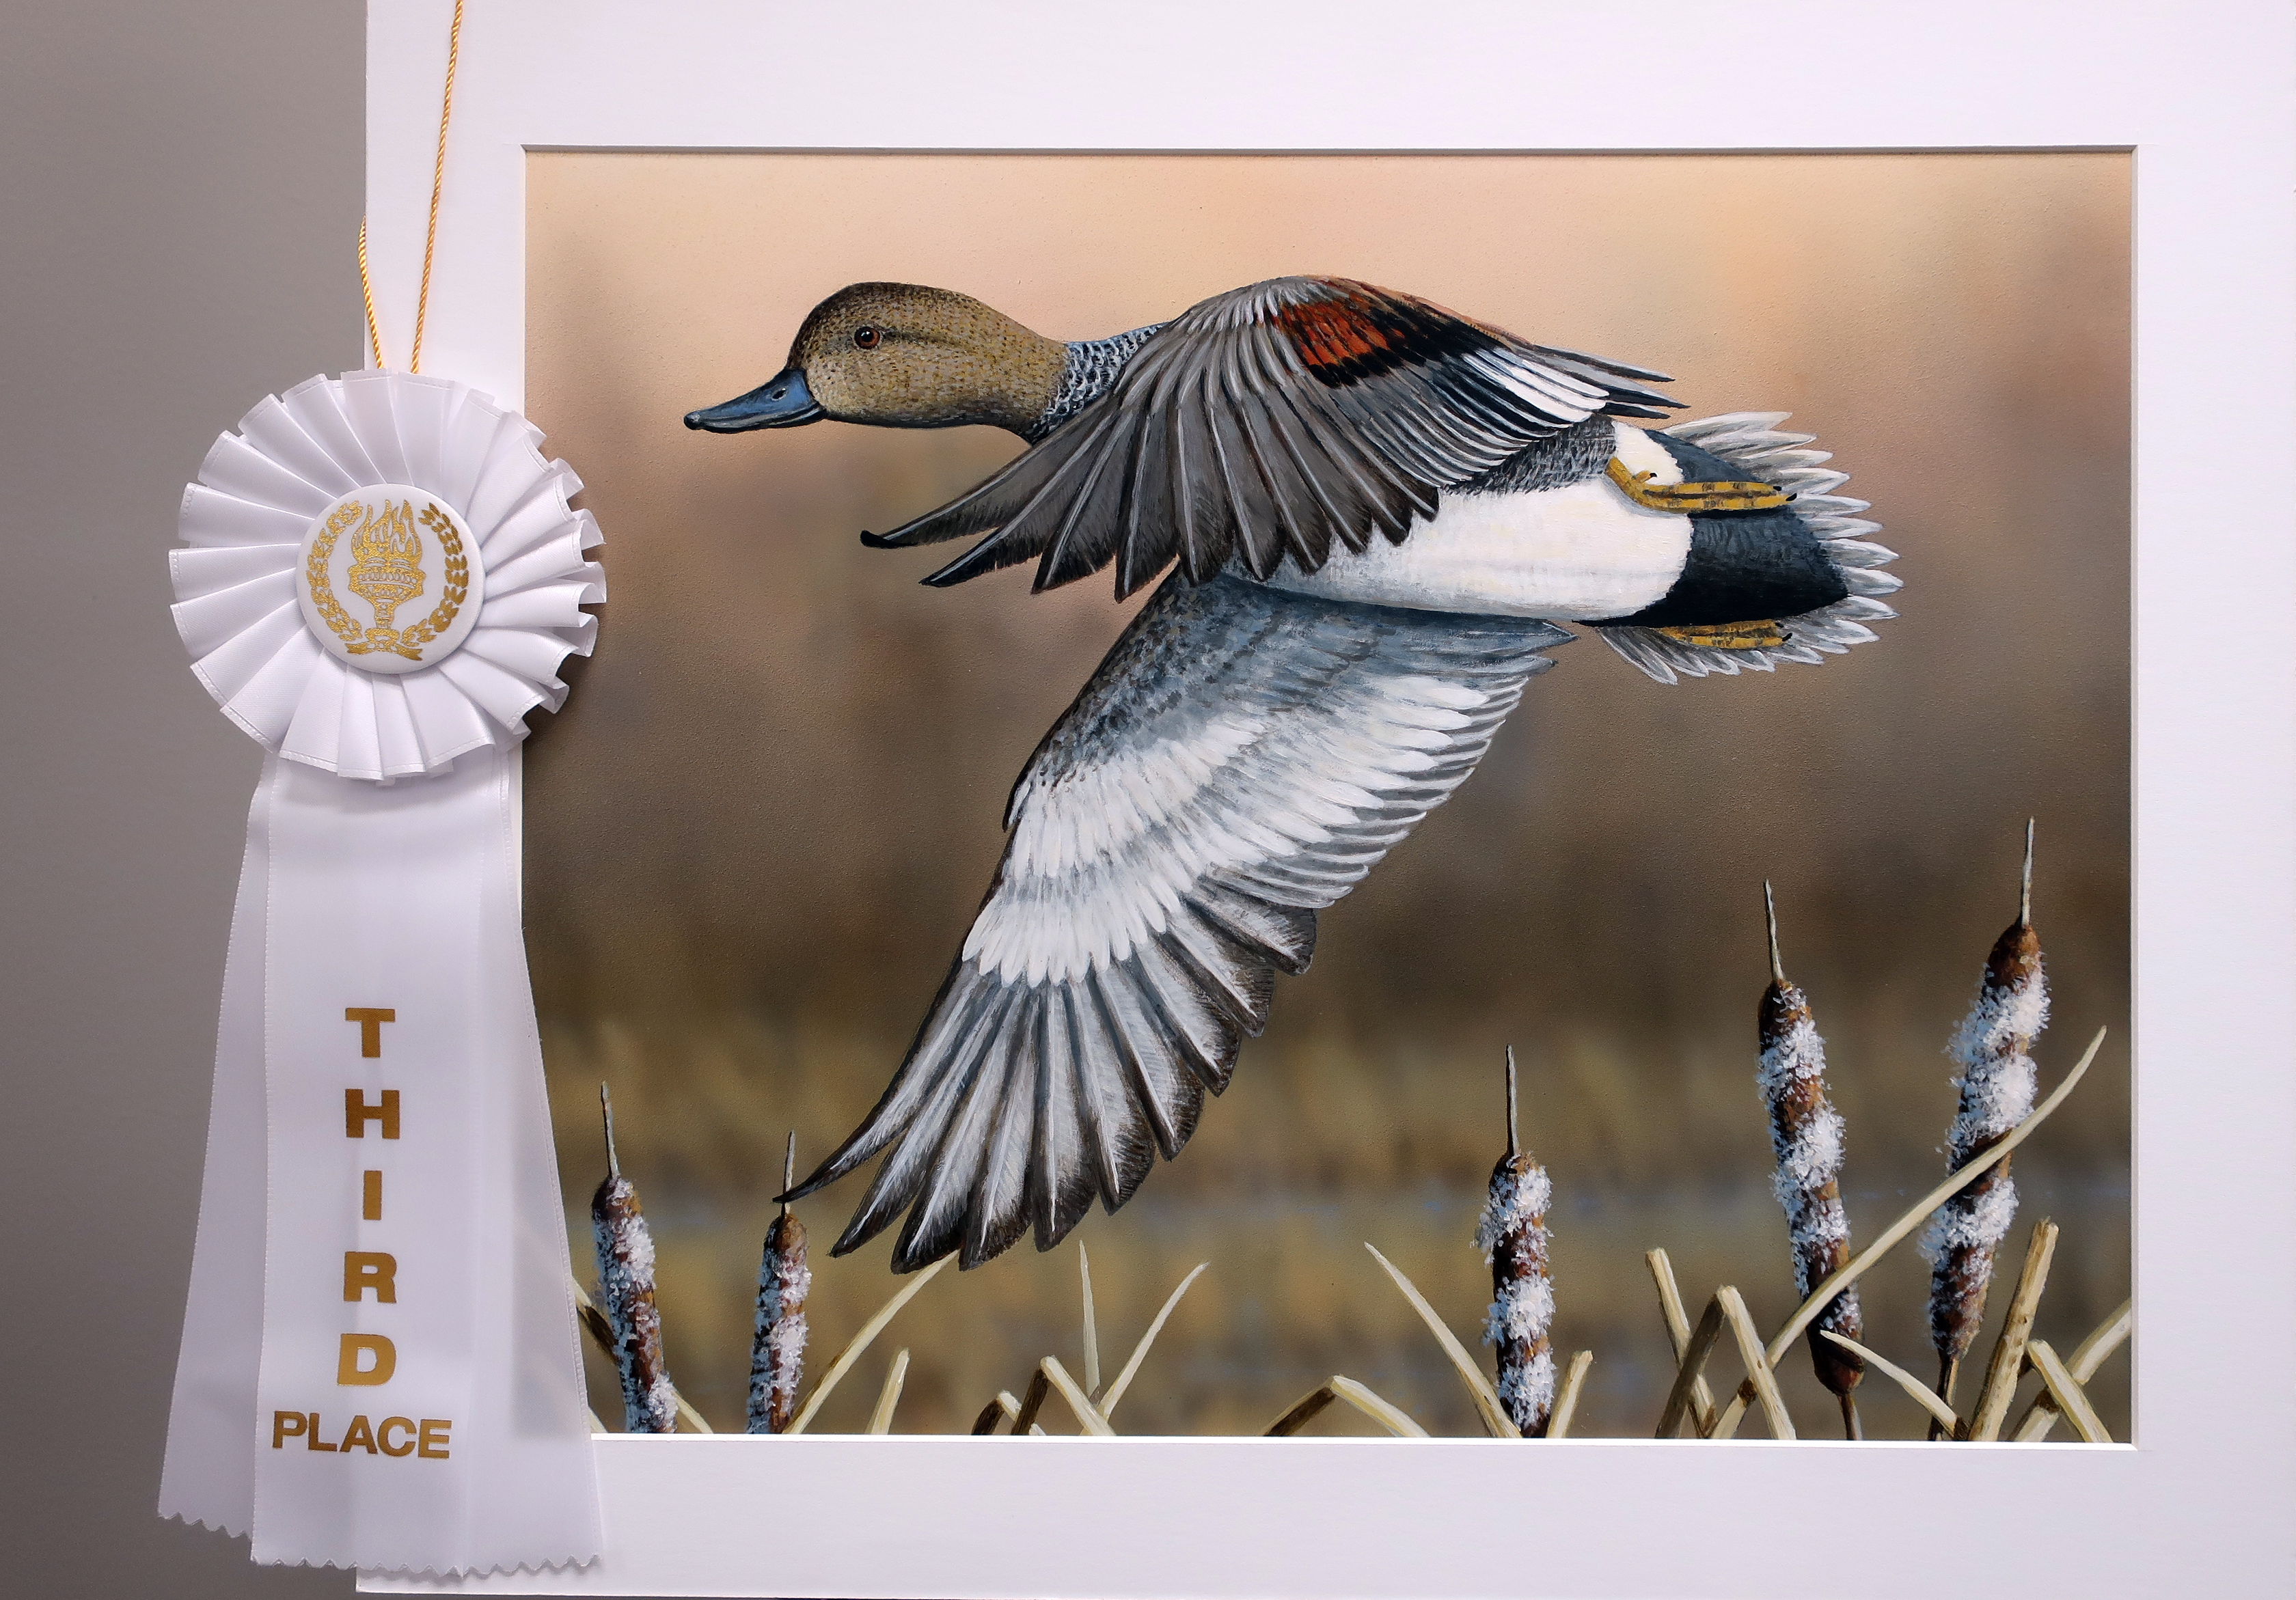 3rd place duck stamp of gadwall in flight over reeds